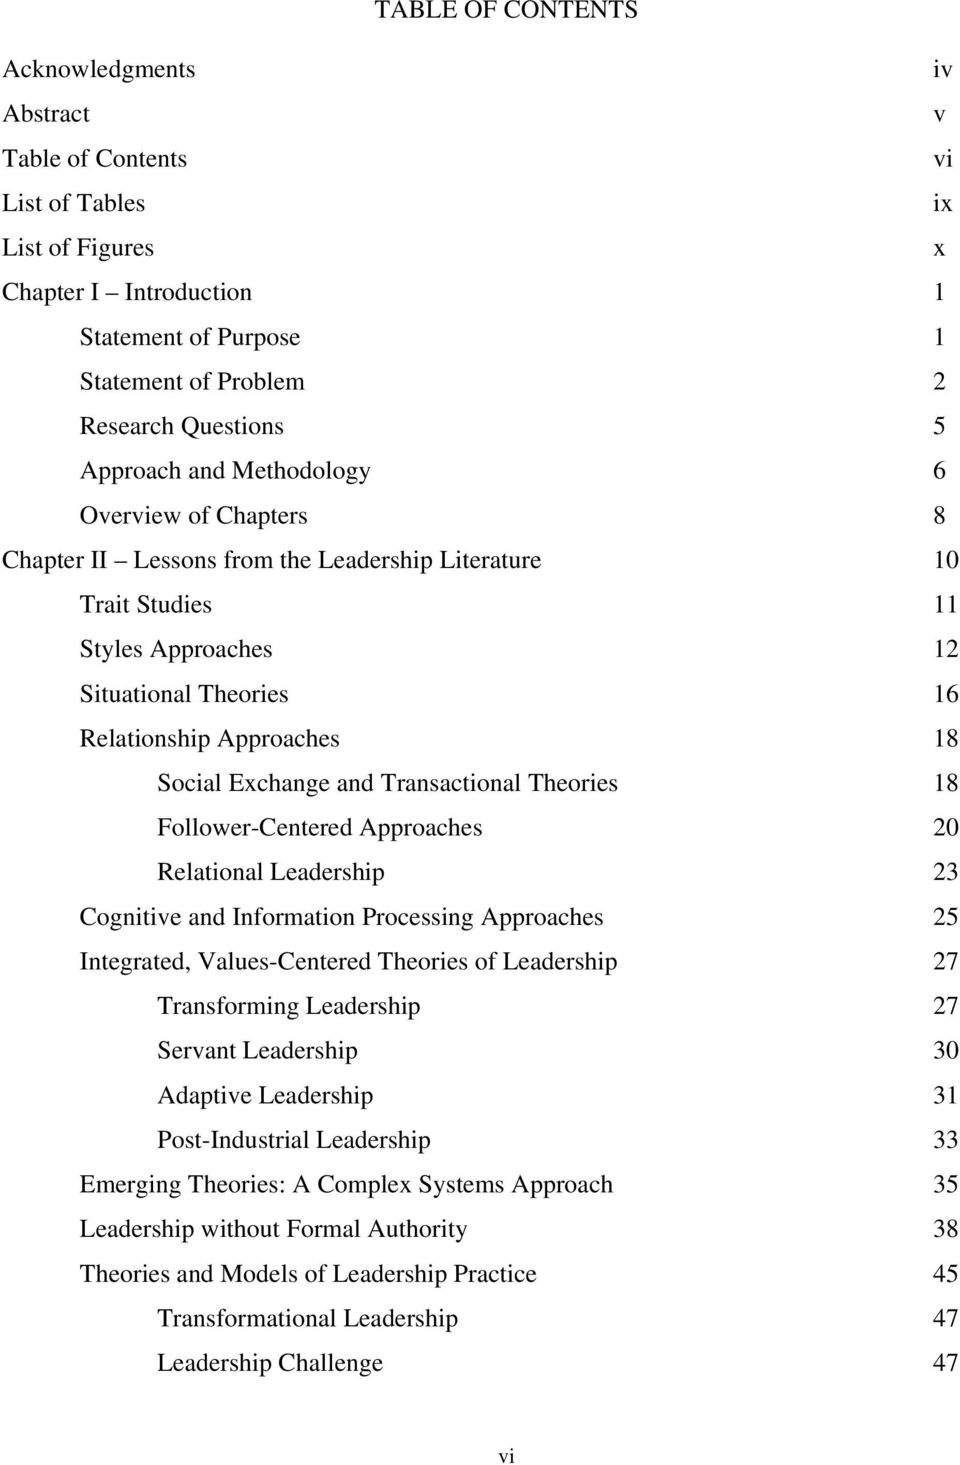 Exchange and Transactional Theories 18 Follower-Centered Approaches 20 Relational Leadership 23 Cognitive and Information Processing Approaches 25 Integrated, Values-Centered Theories of Leadership